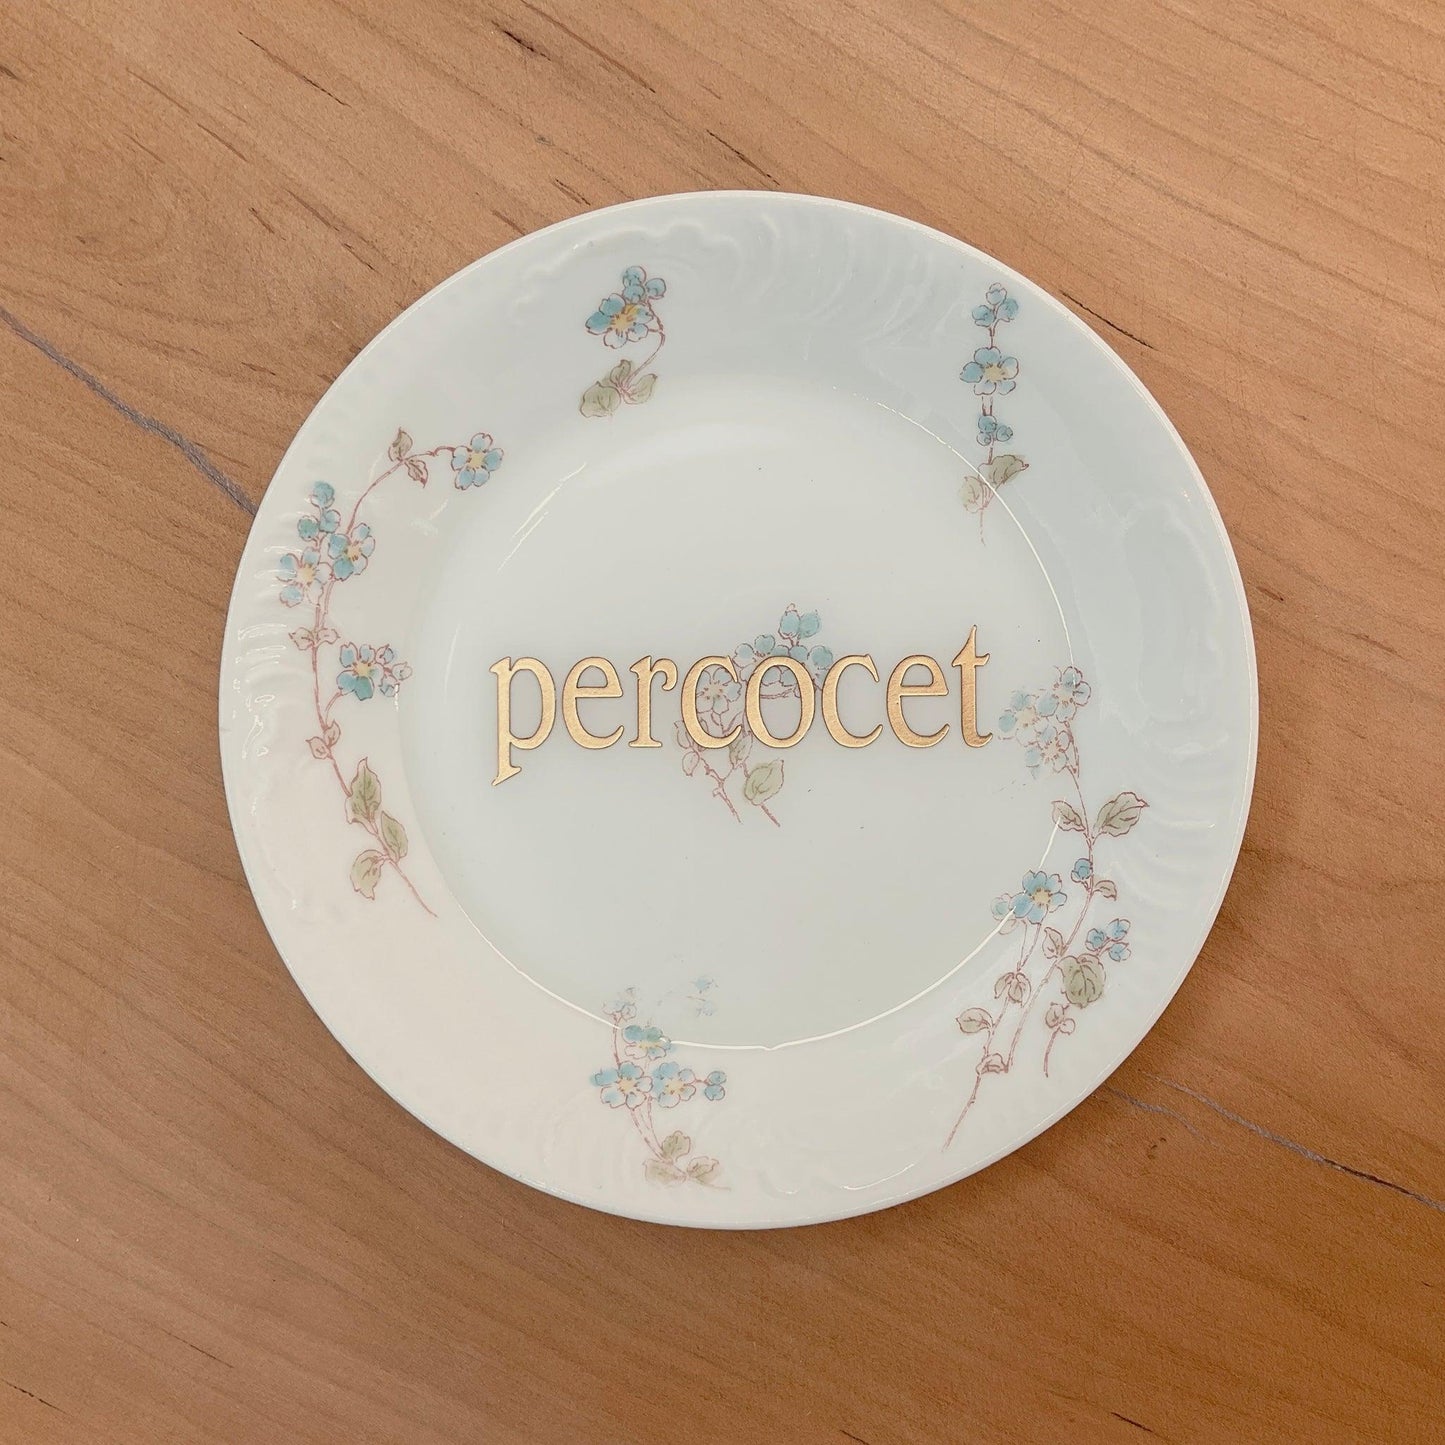 Percocet Candy Dish - Offensively Domestic